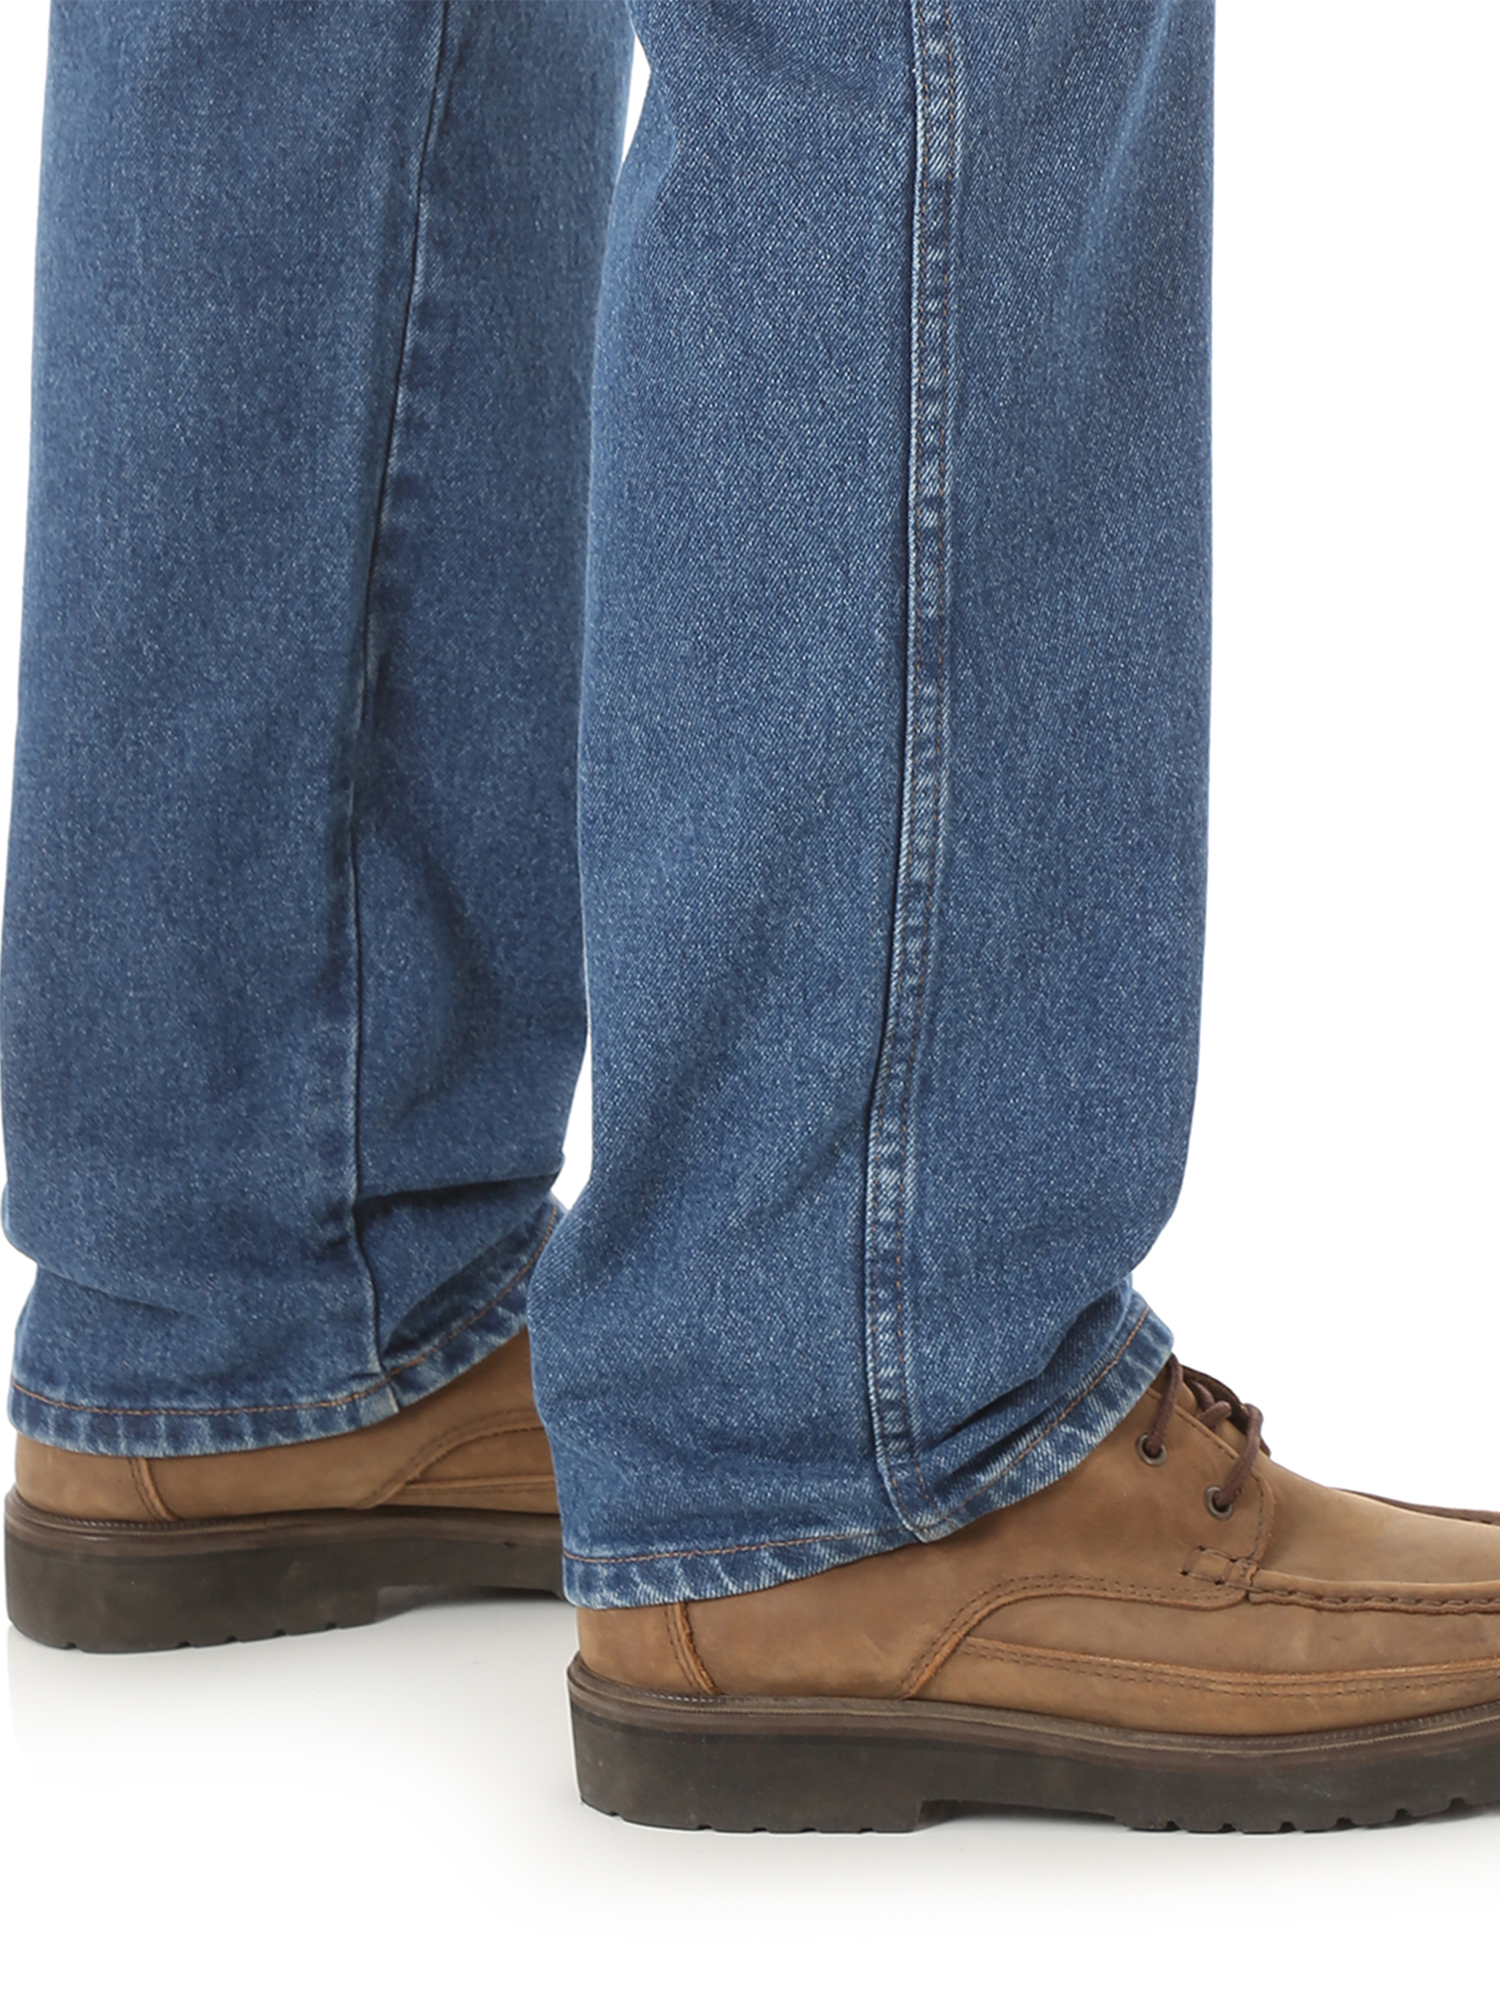 Wrangler Rustler Men's and Big Men's Relaxed Fit Jeans - image 4 of 5